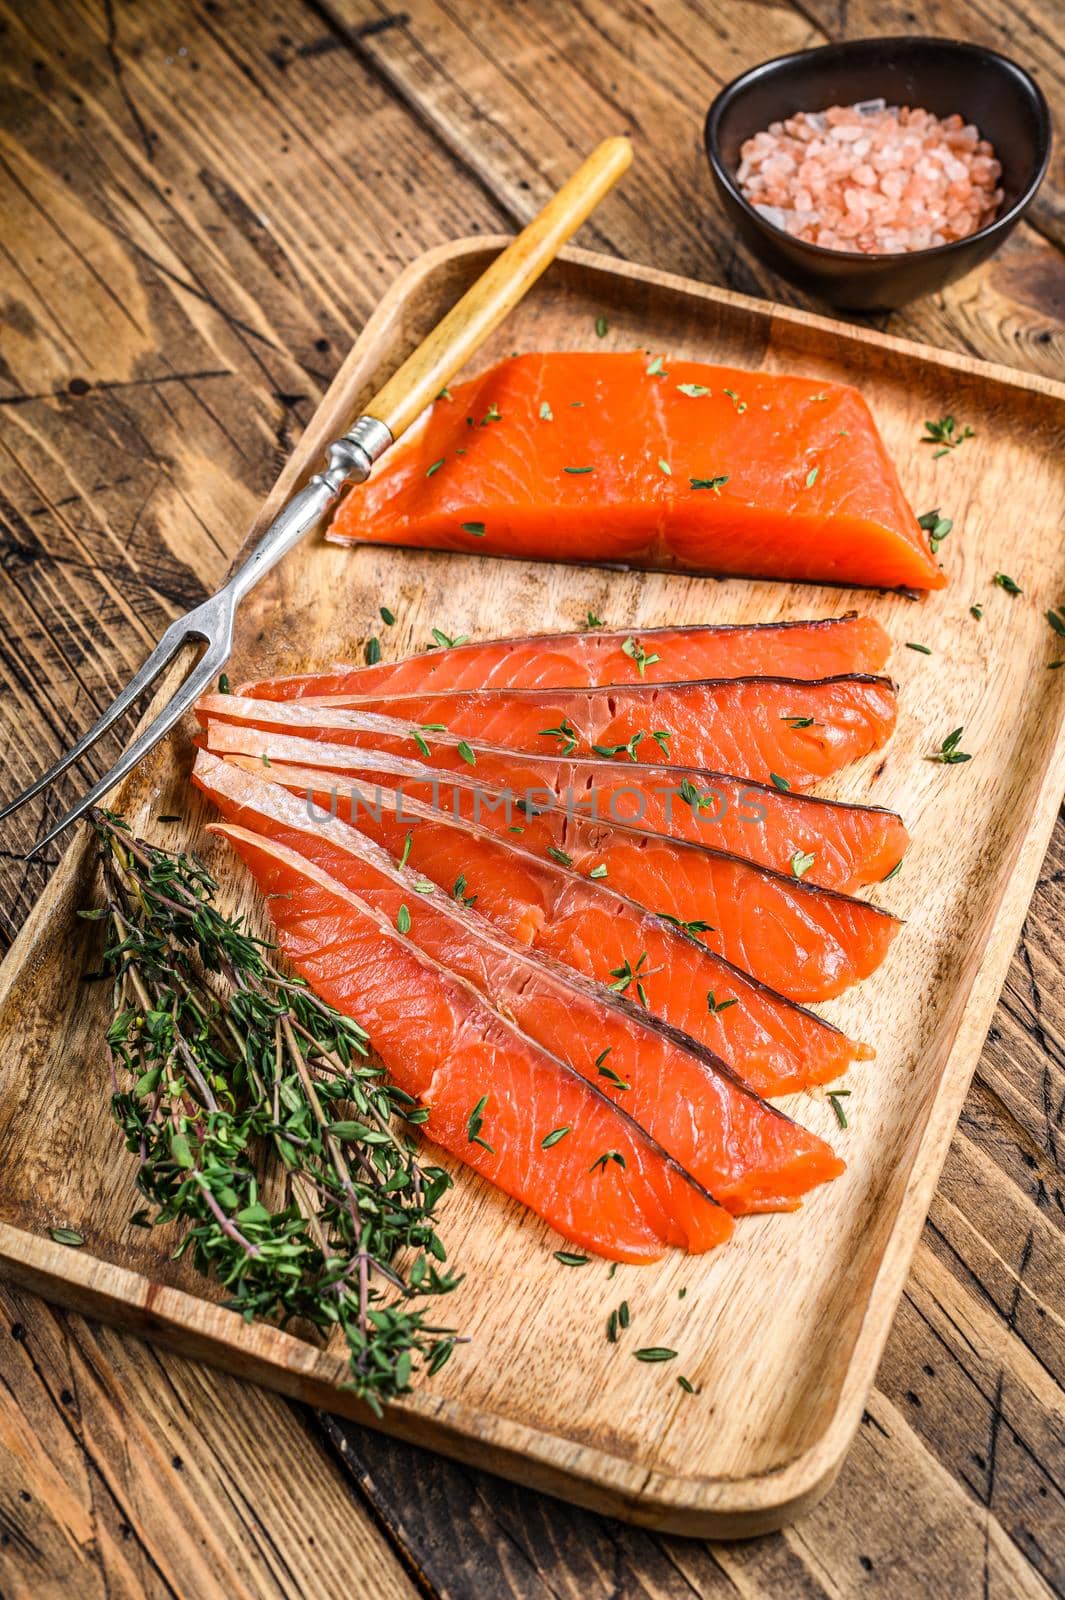 Salted salmon fillet slices in a wooden tray with thyme. wooden background. Top view by Composter